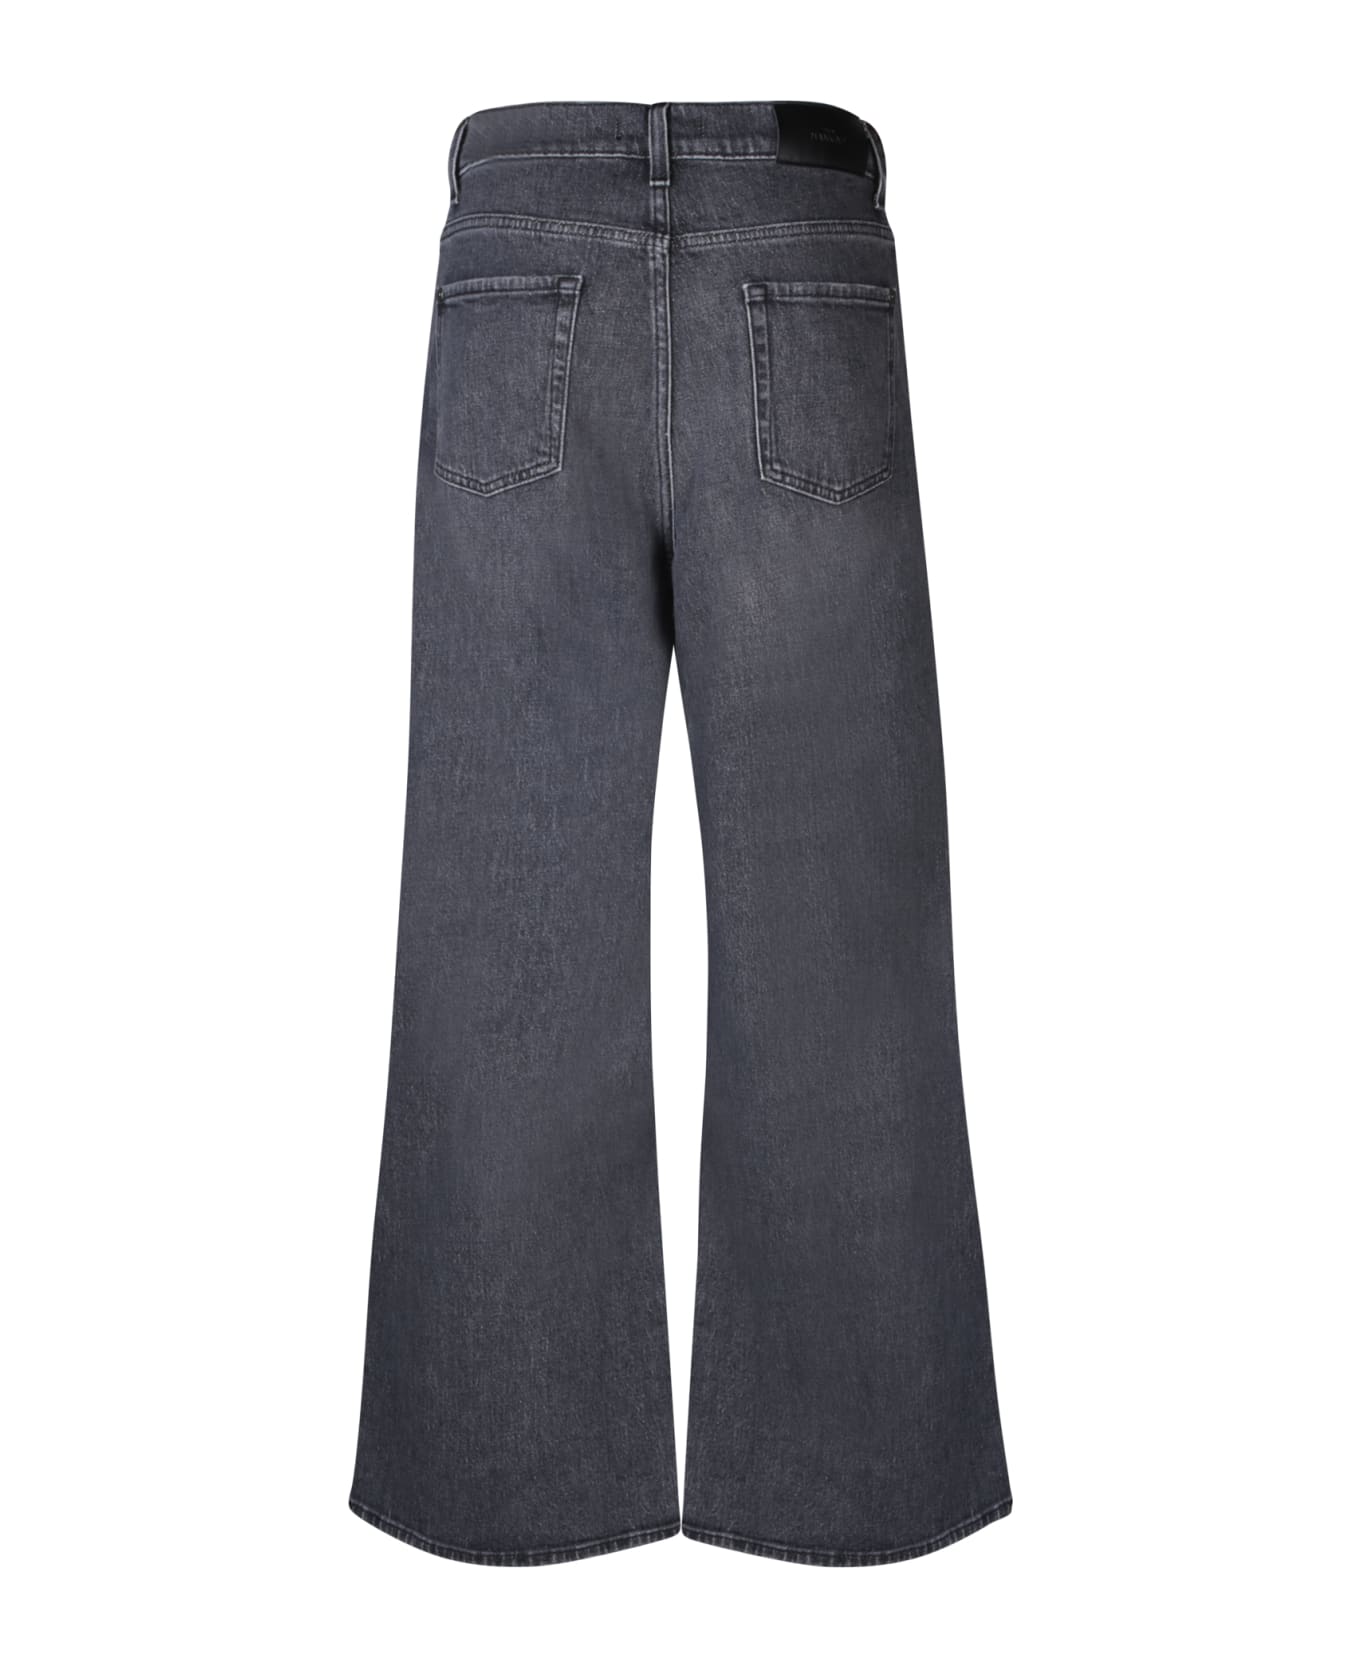 7 For All Mankind Zoey Grey Jeans - Grey デニム